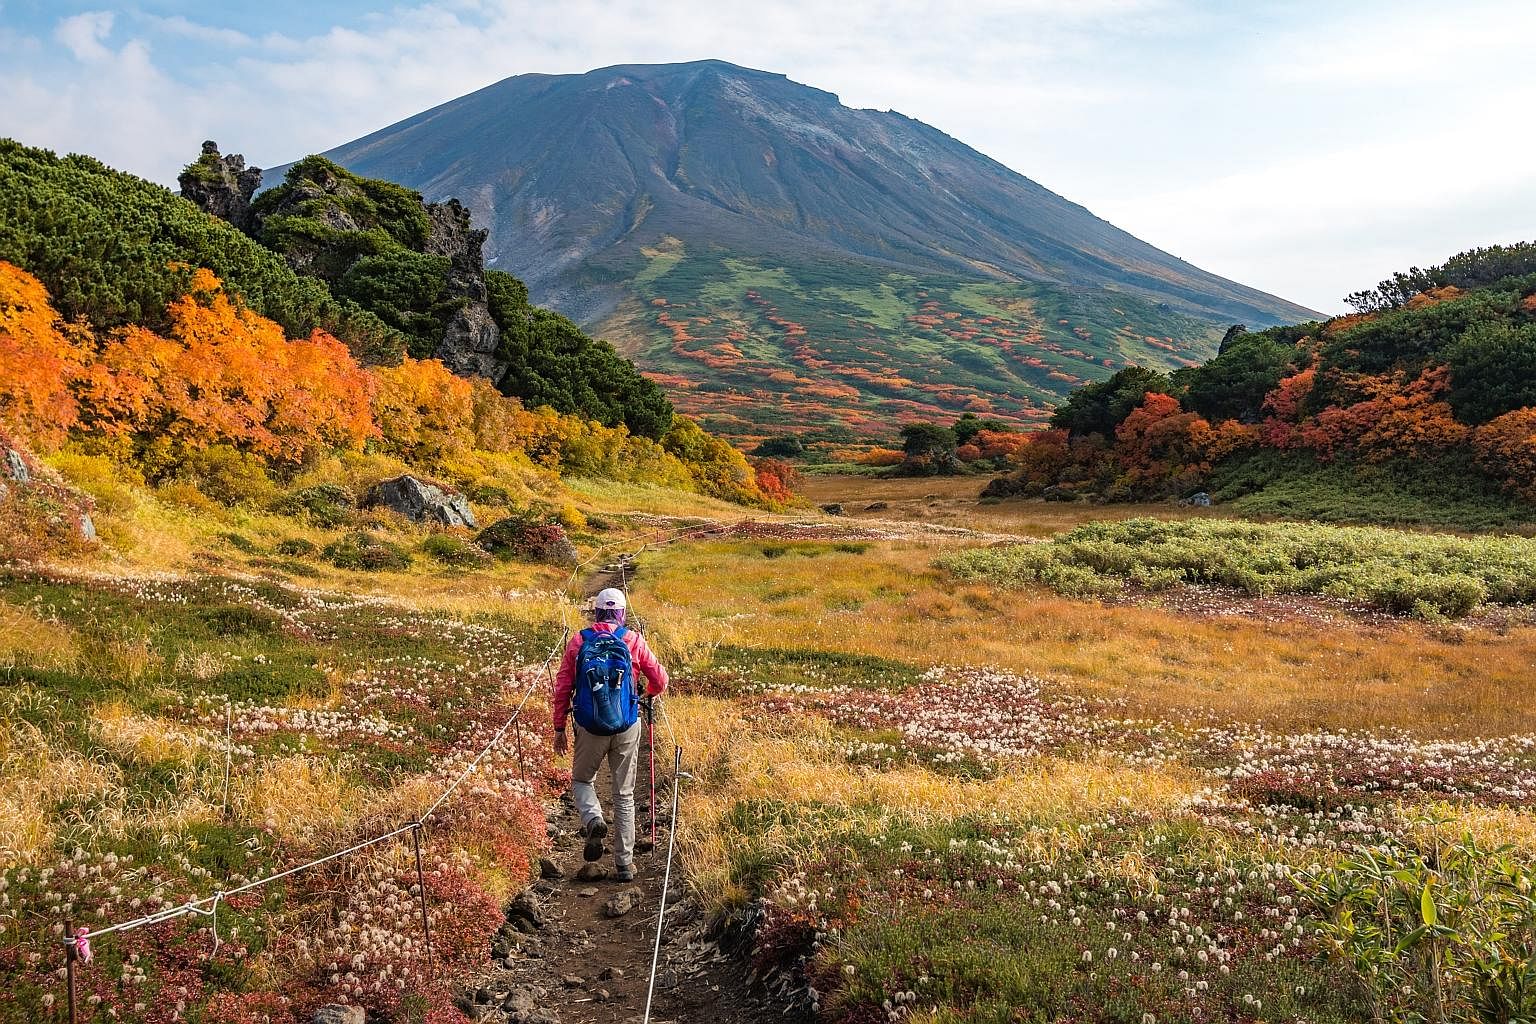 Hike among autumn colours on the trail towards Mount Asahi-dake in Daisetsuzan National Park. Forested Minoo Park's hidden attraction is its 33m waterfall. In autumn, the Sagano Scenic Railway sightseeing train in Kyoto takes passengers through a lan